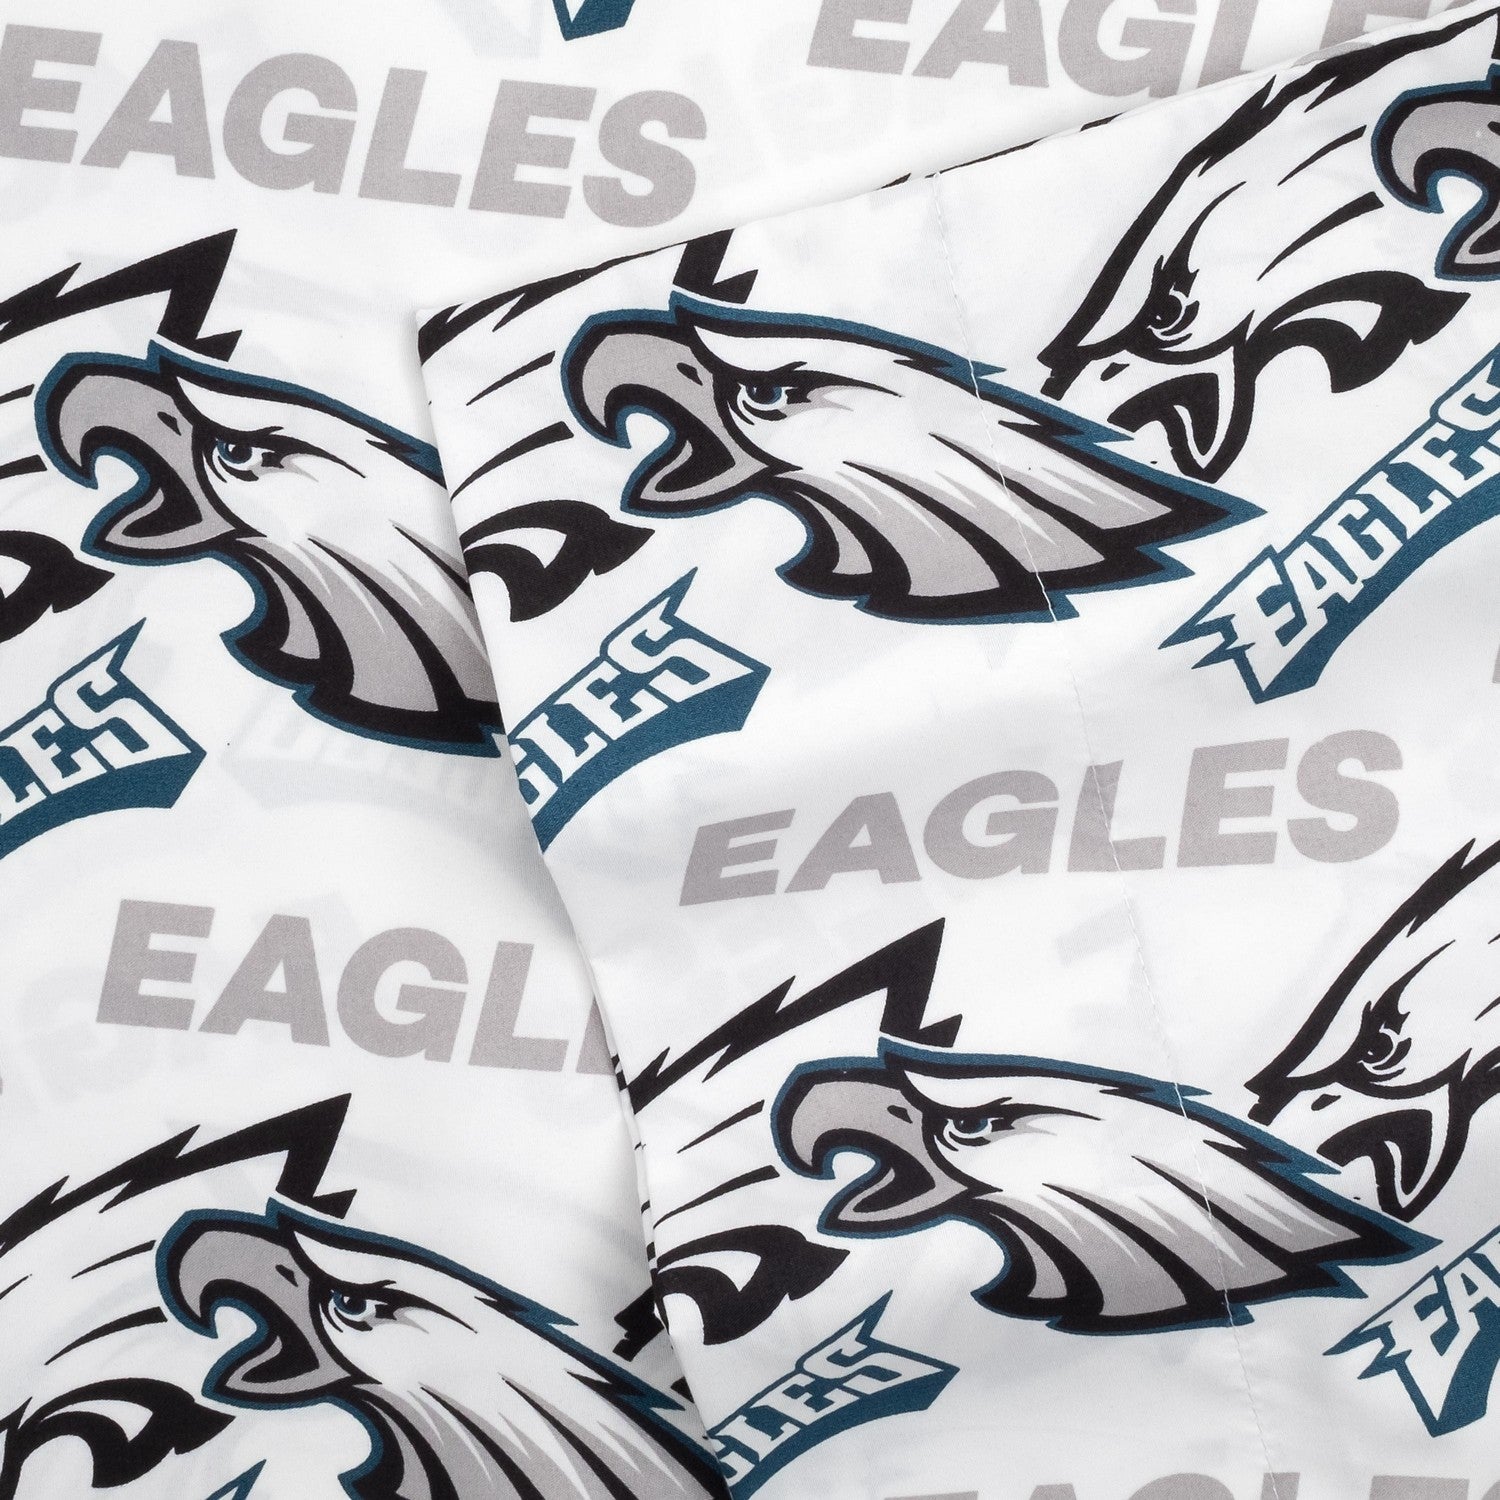 Philadelphia Eagles NFL Officially Licensed 4-Piece Sheet Set - Fabric